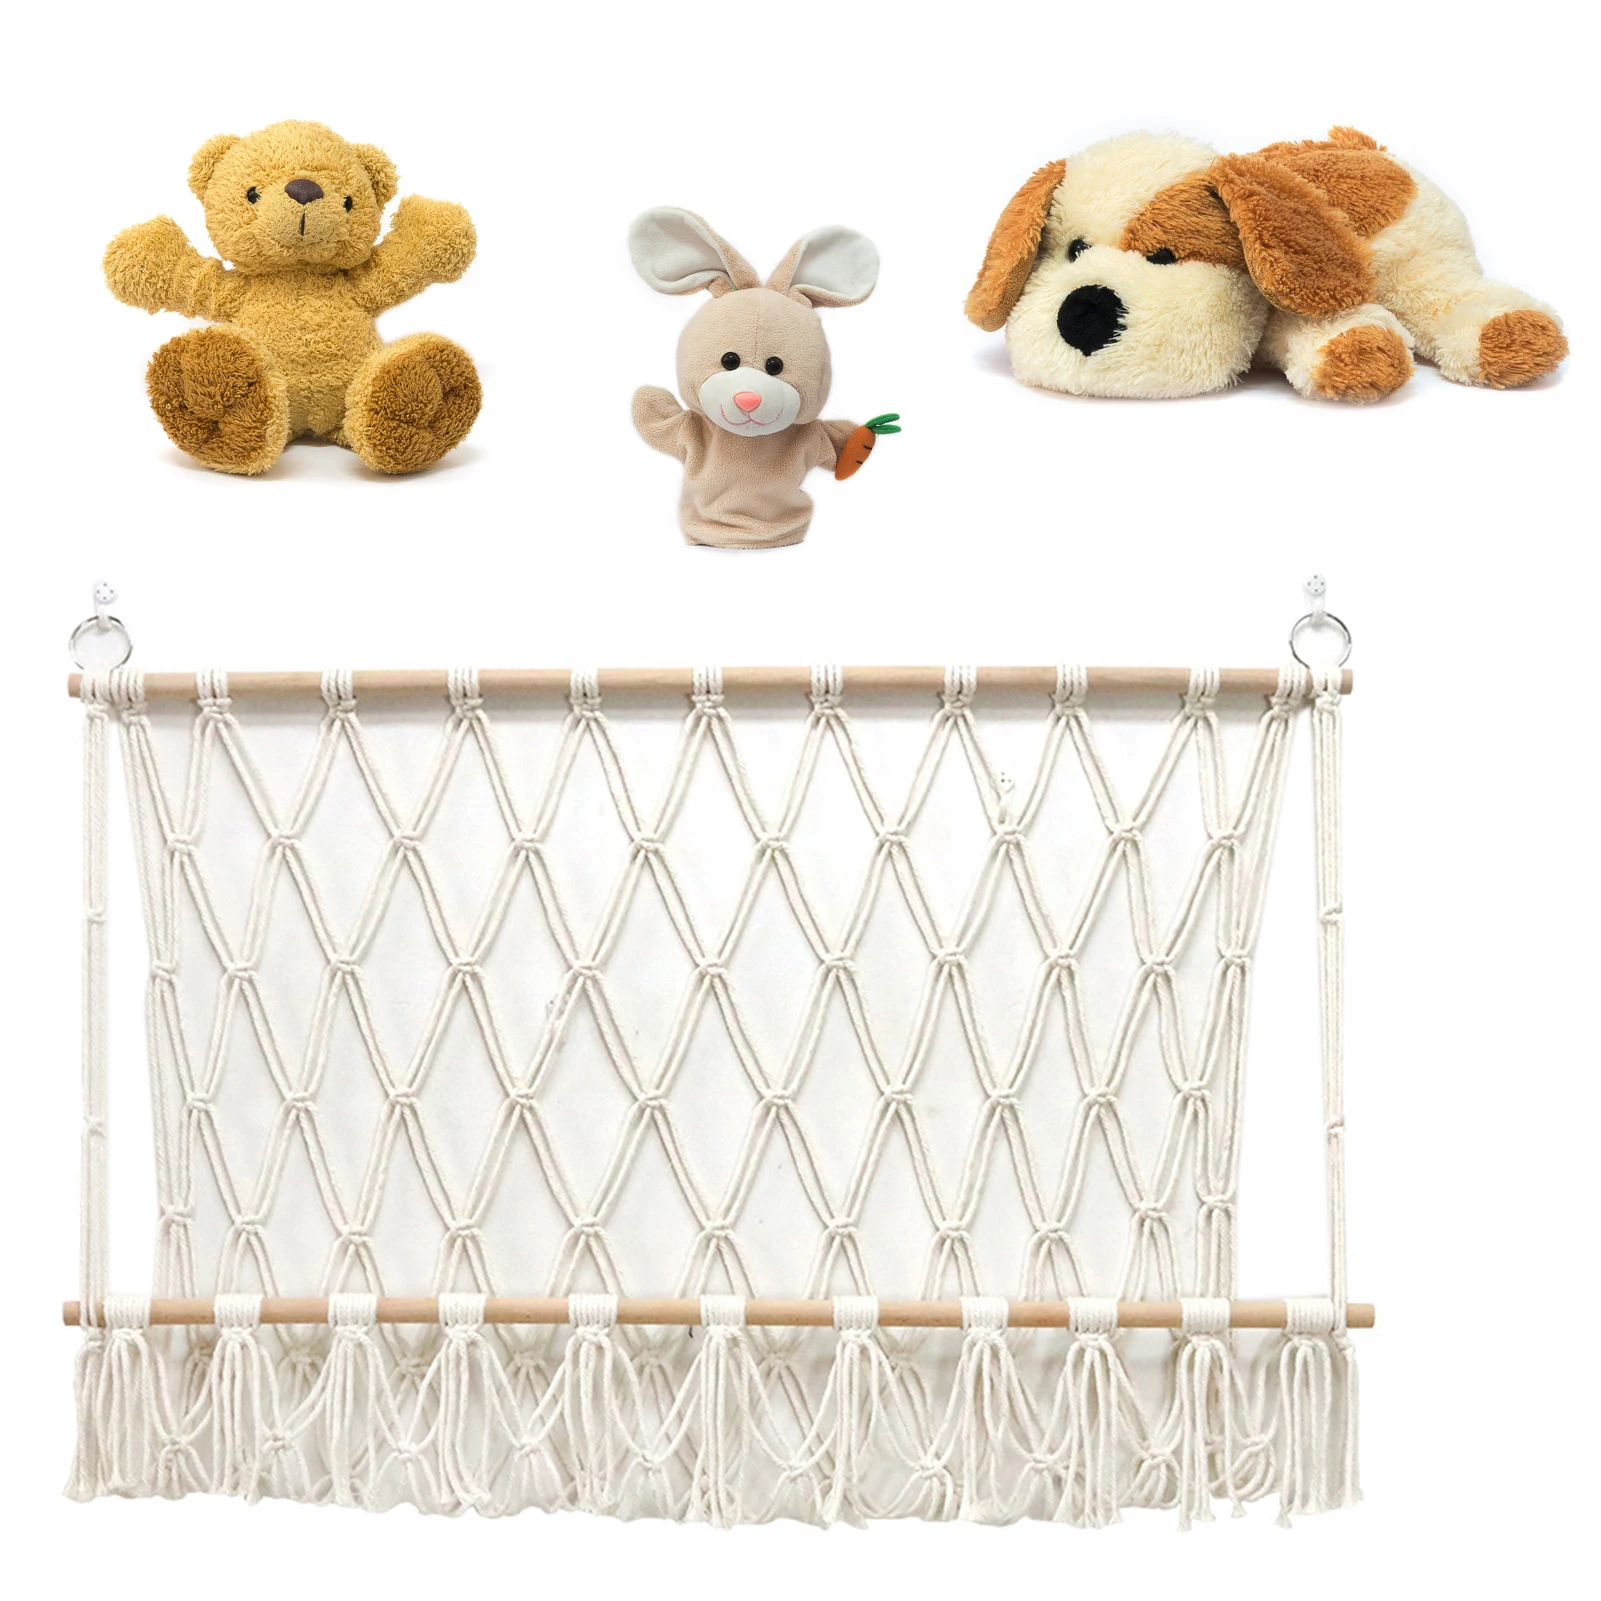 

Jumbo Toy Storage Hammock Strong And Sturdy Toy Net For Toddlers Toy Organizer For Stuffed Animals And Children's Toys. Displays